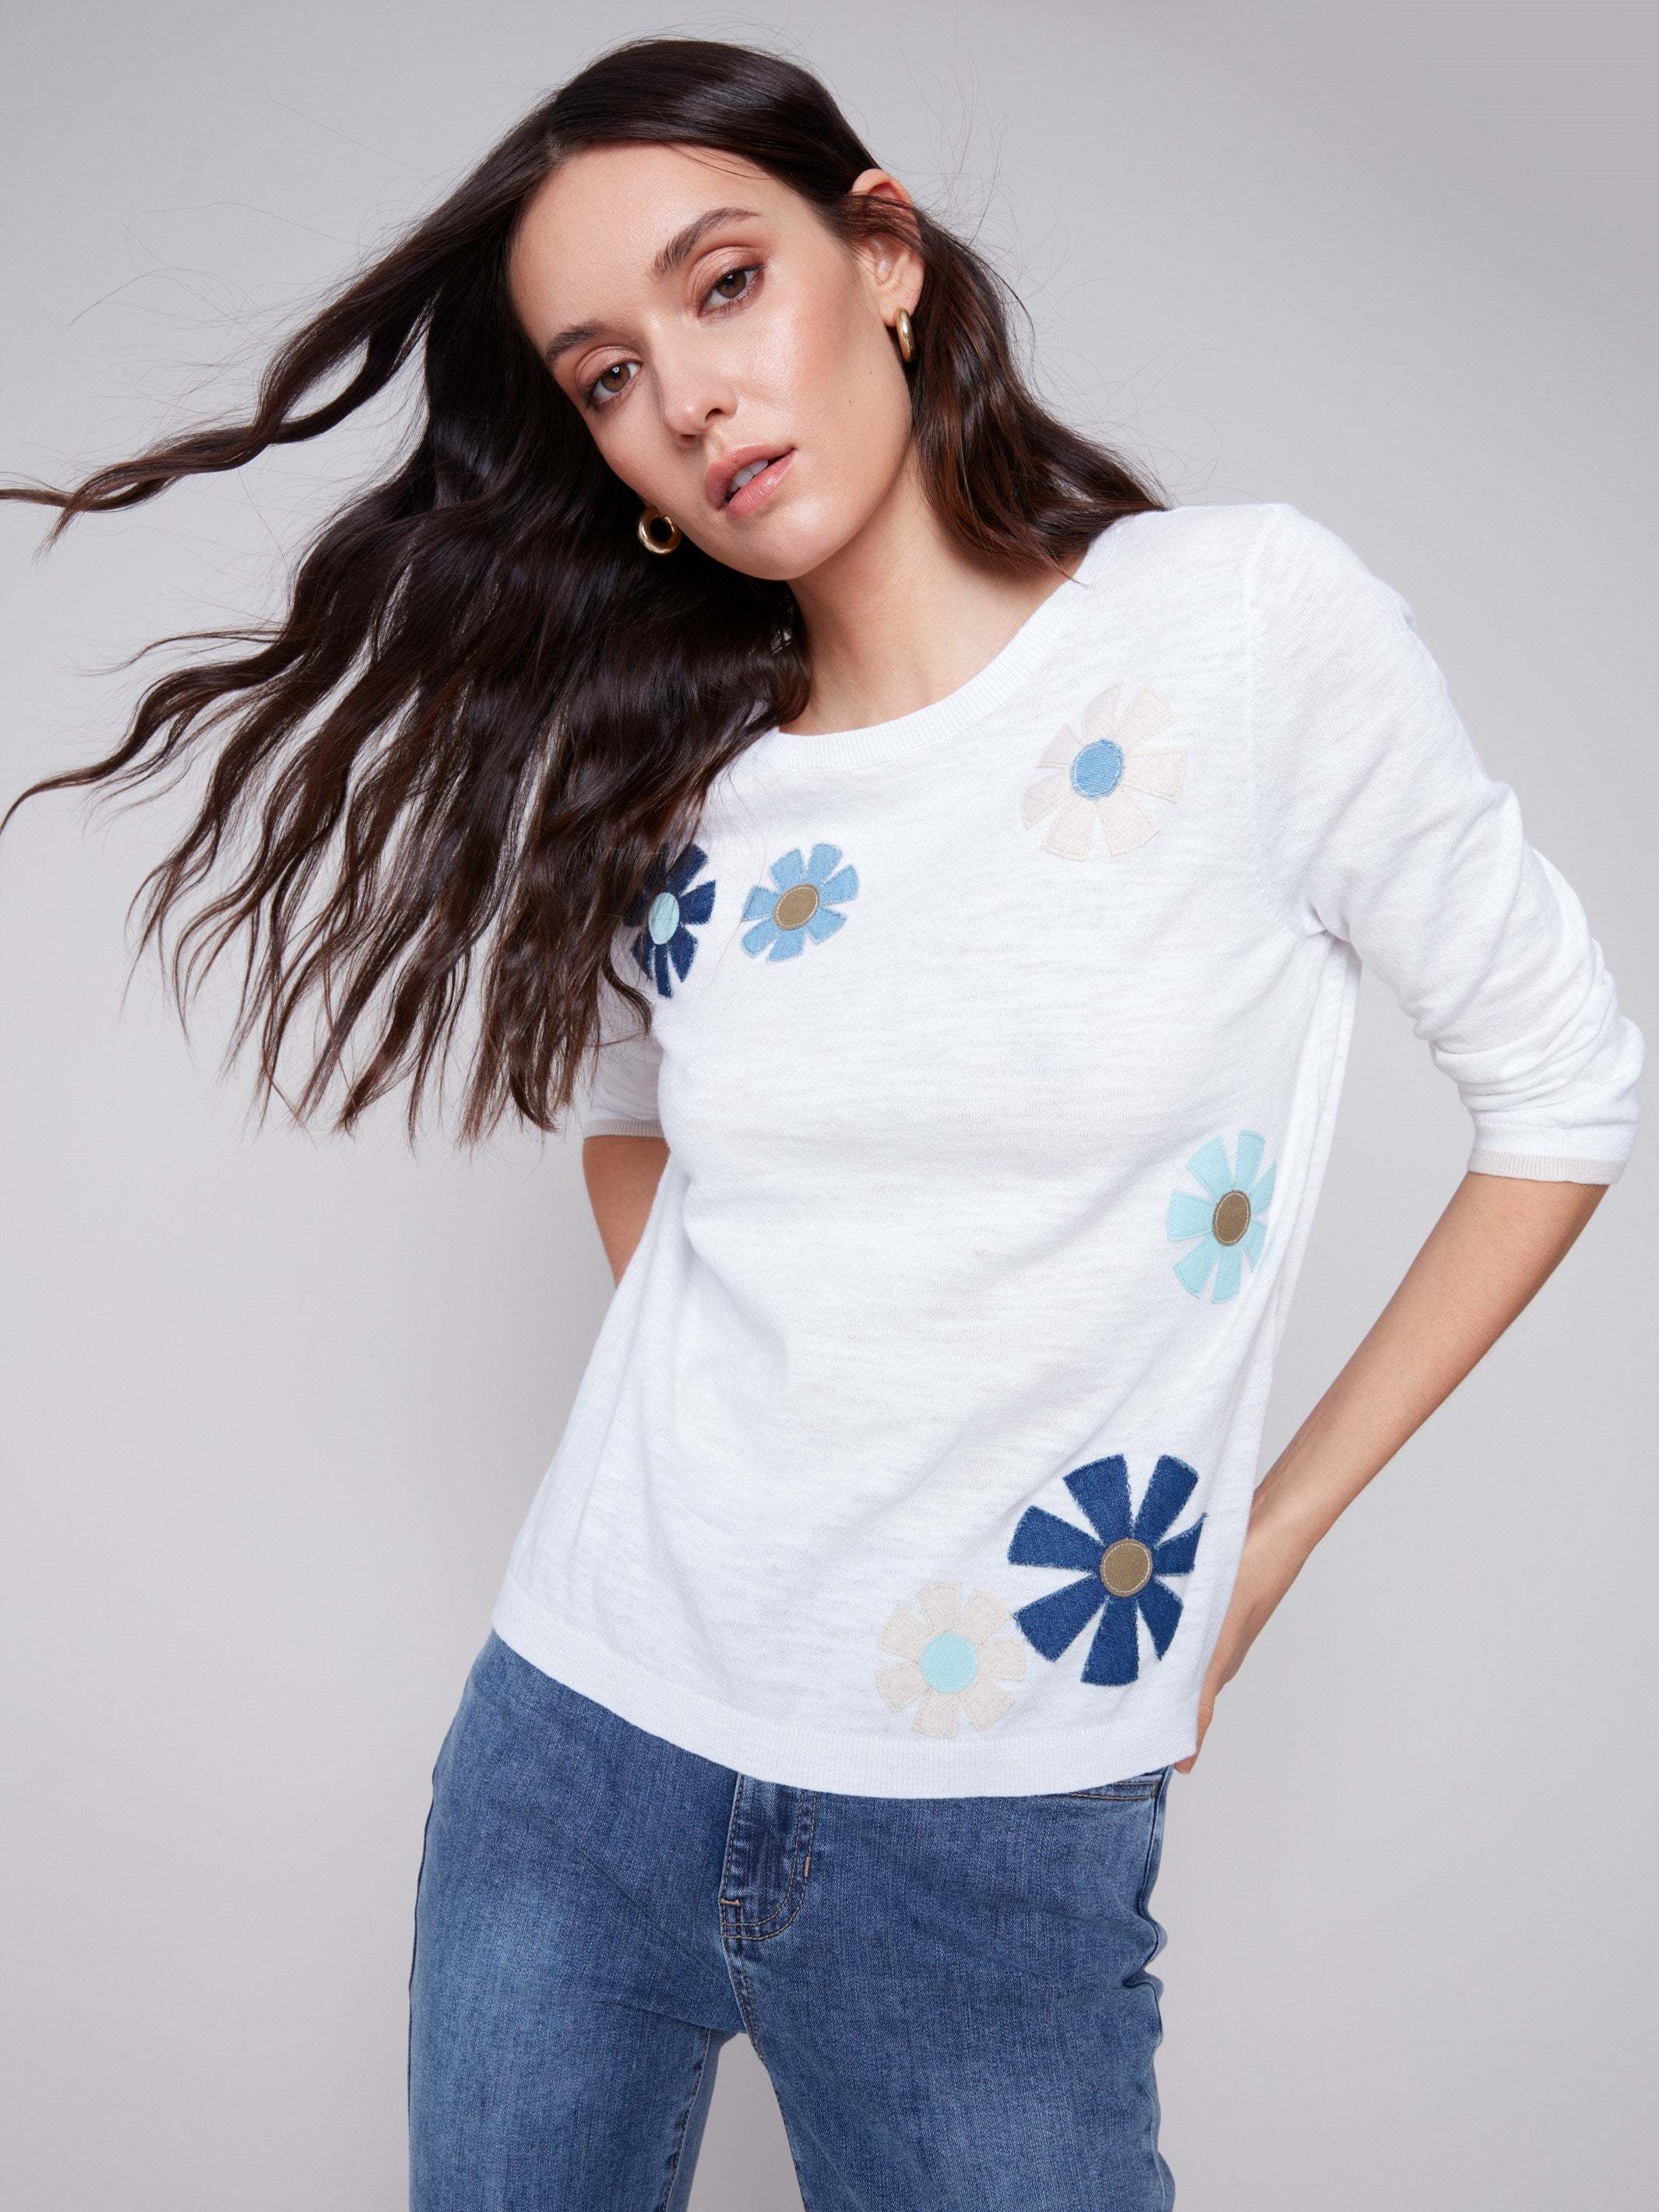 Sweater with Flower Patches - White - Charlie B Collection Canada - Image 4